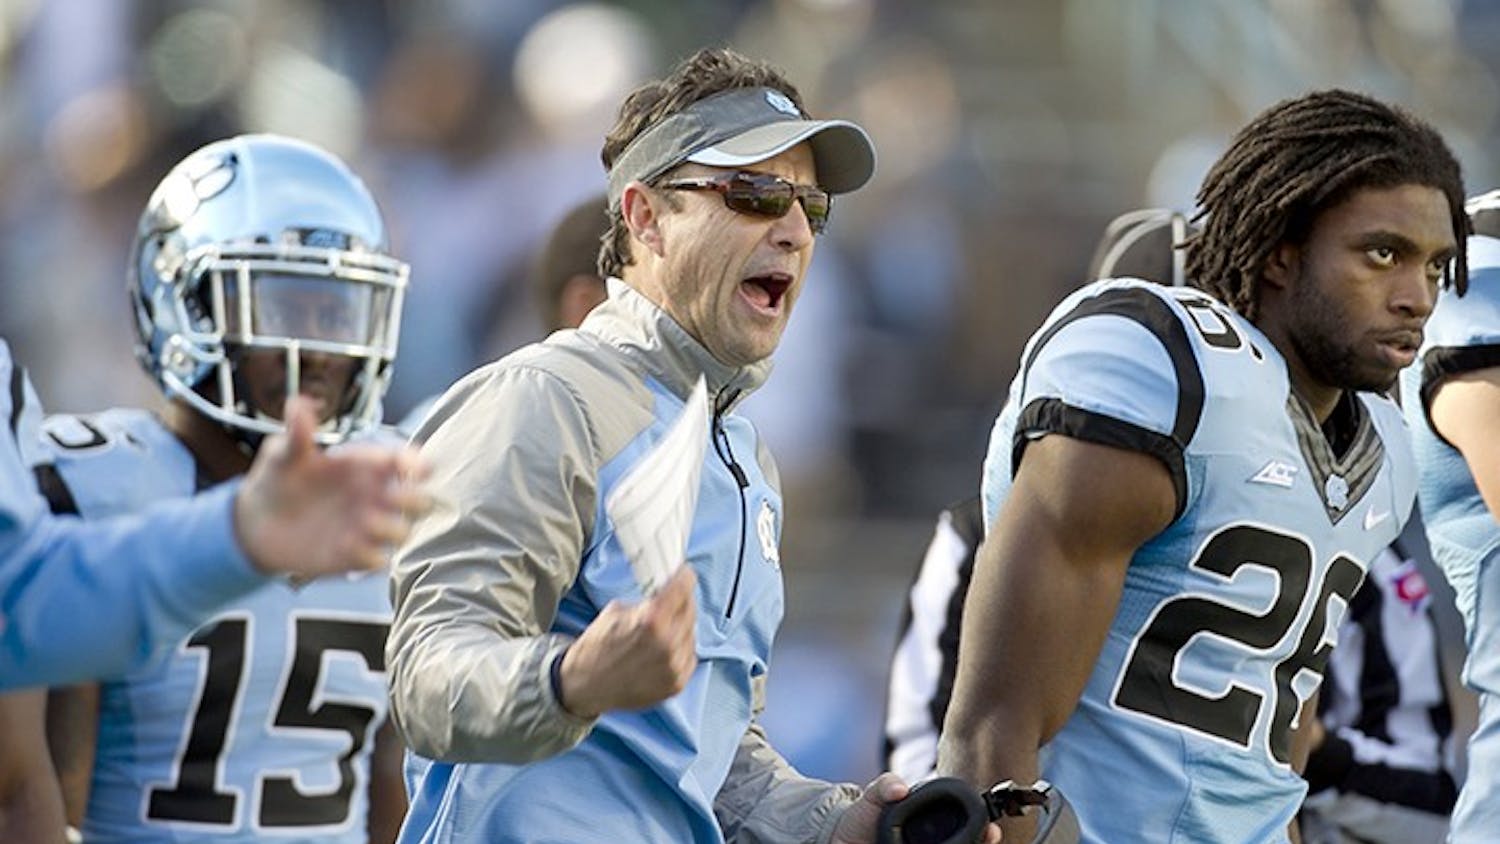 UNC head coach Larry Fedora reacts after N.C. State&apos;s Juston Burris (10) intercepted a Marquise Williams pass late in the second quarter on Saturday, Nov. 29, 2014 at Kenan Stadium in Chapel Hill, N.C. N.C. State won 25-7. (Robert Willett/Raleigh News &amp; Observer/TNS) 